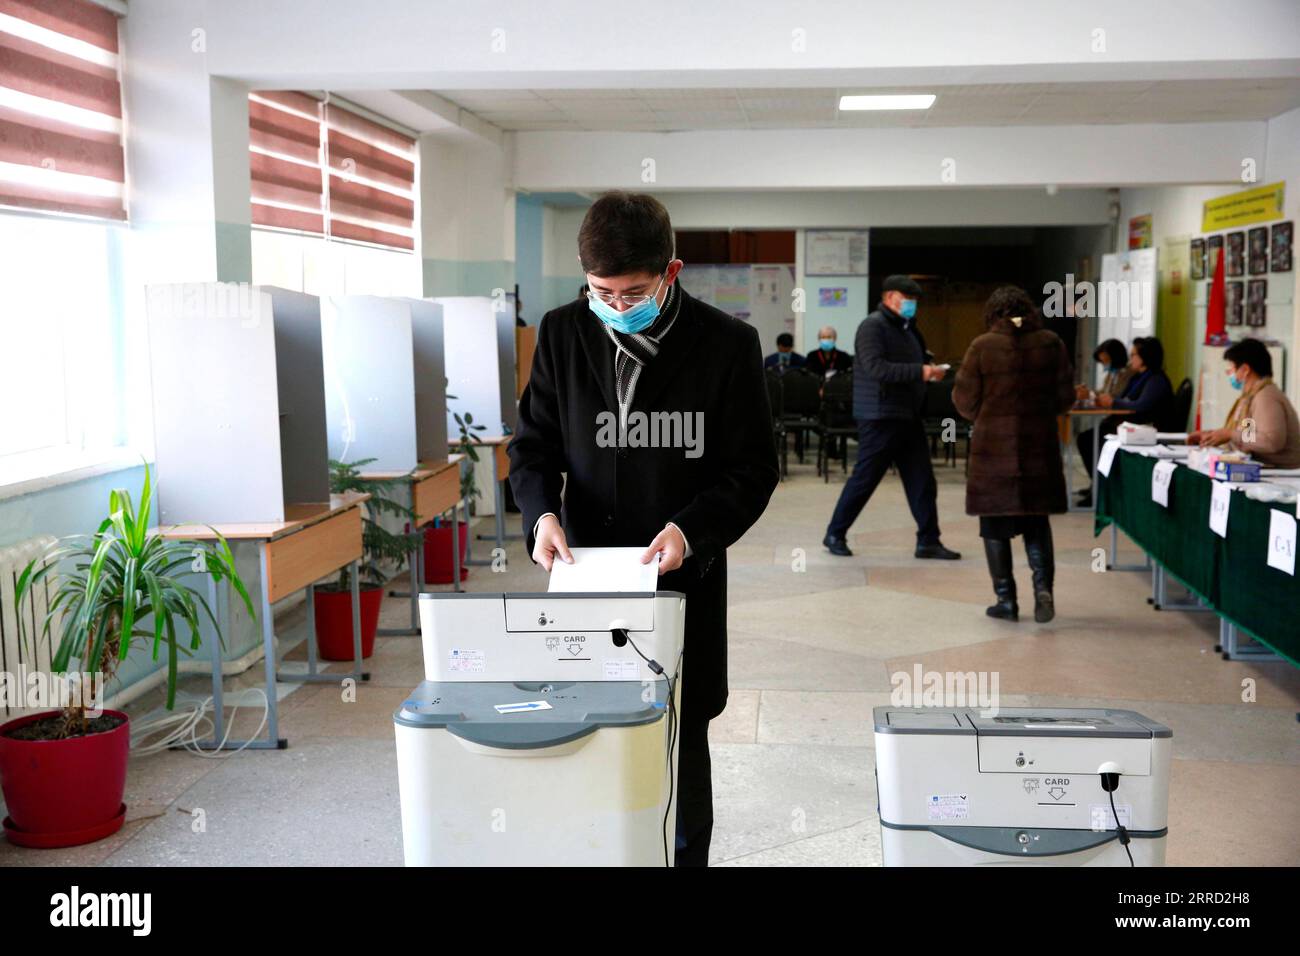 211128 -- BISHKEK, Nov. 28, 2021 -- A man casts his vote at a polling station in Bishkek, Kyrgyzstan, Nov. 28, 2021. Parliamentary elections in Kyrgyzstan started on Sunday under the watch of 736 international observers to elect 90 deputies for a five-year term. Photo by /Xinhua KYRGYZSTAN-BISHKEK-PALIAMENTARY ELECTIONS Roman PUBLICATIONxNOTxINxCHN Stock Photo